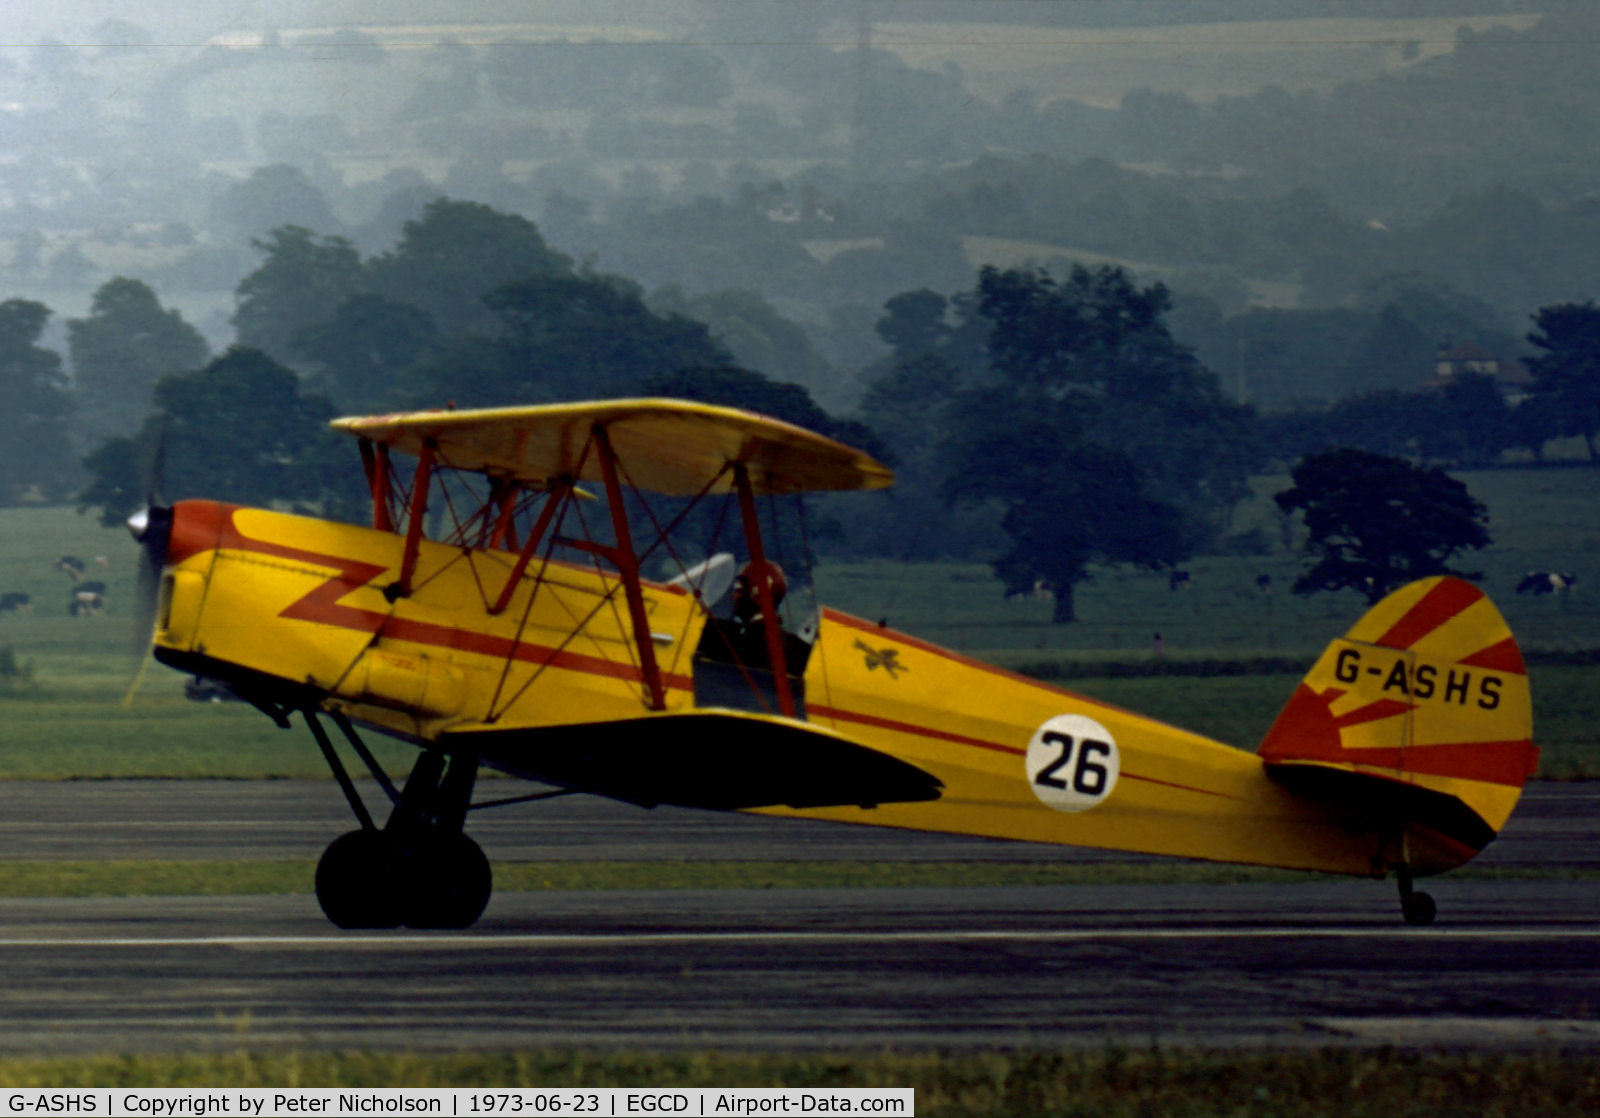 G-ASHS, 1946 Stampe-Vertongen SV-4C(G) C/N 265, Stampe SV-4C seen in action at the 1973 Woodford Airshow.